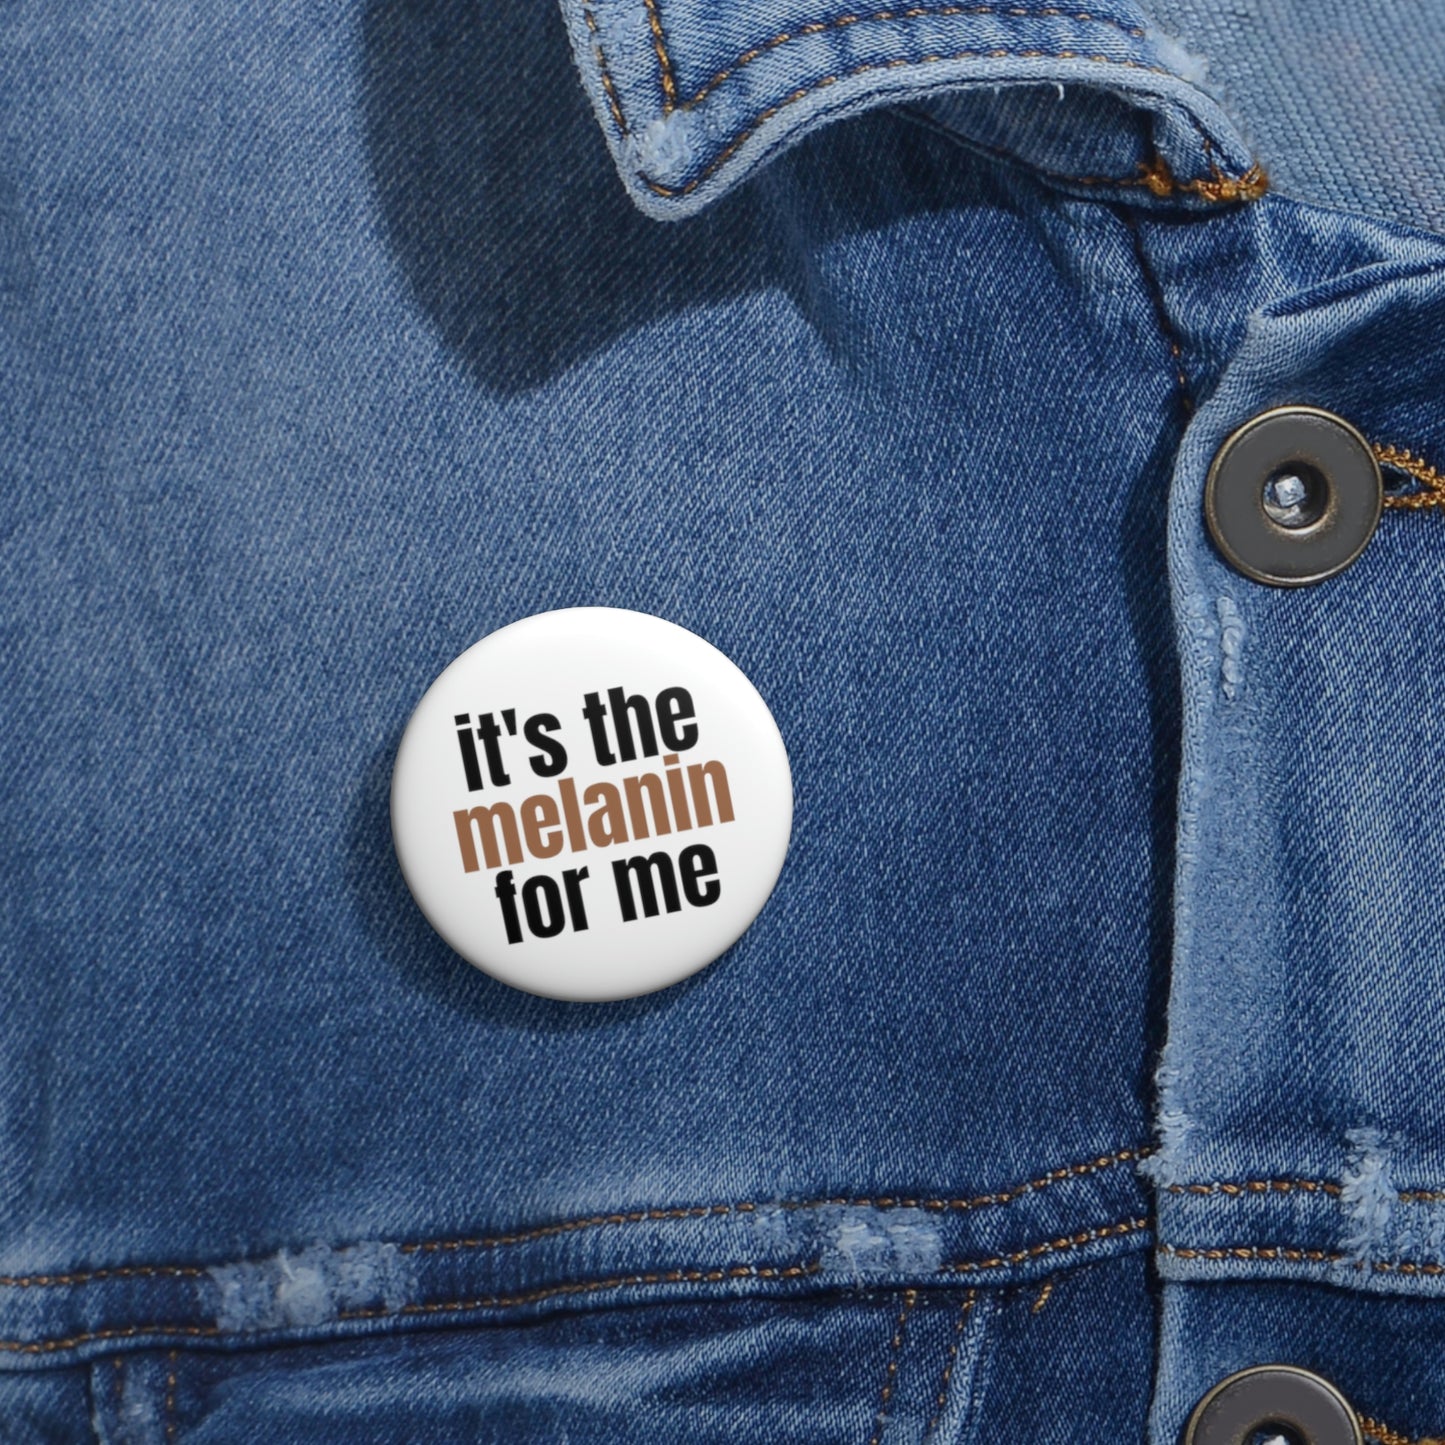 "it's the melanin for me" Pin Button - white